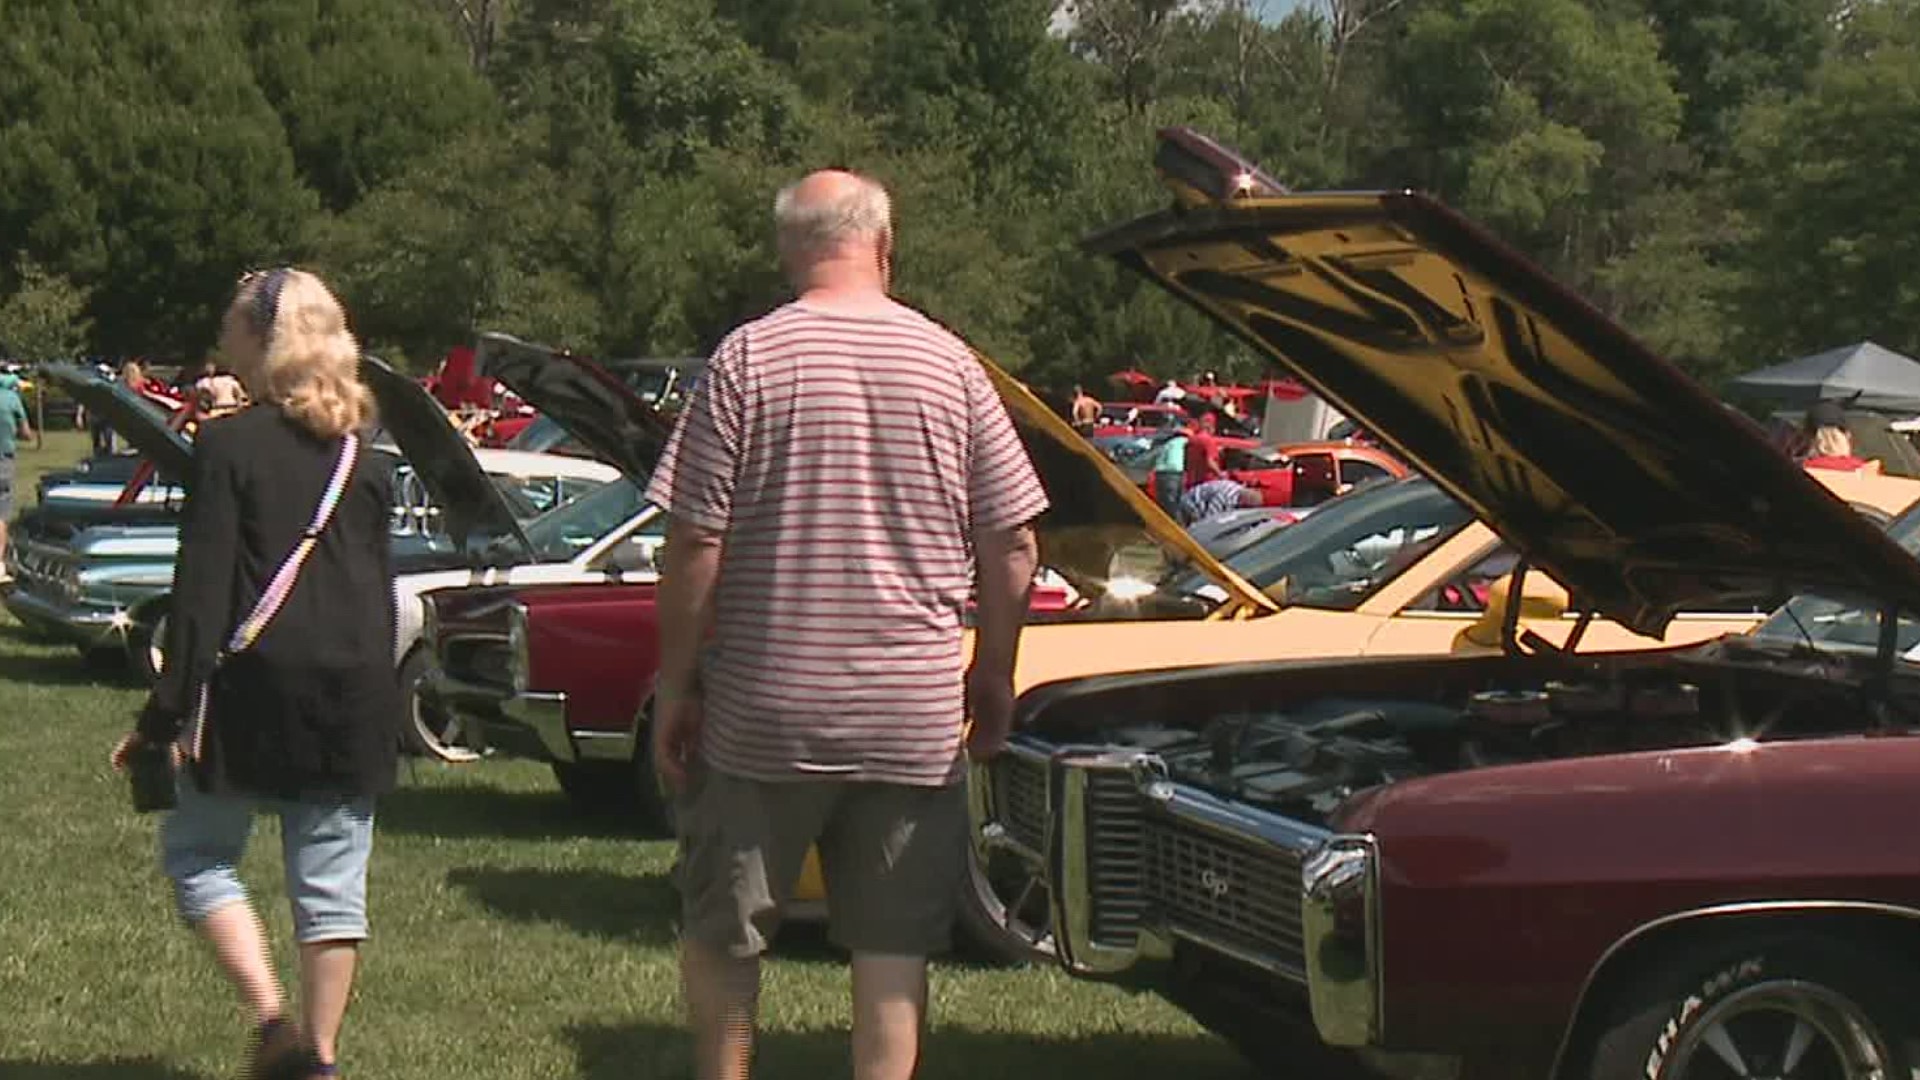 100 cars showed up Saturday, the most the organization has had at the event to date.